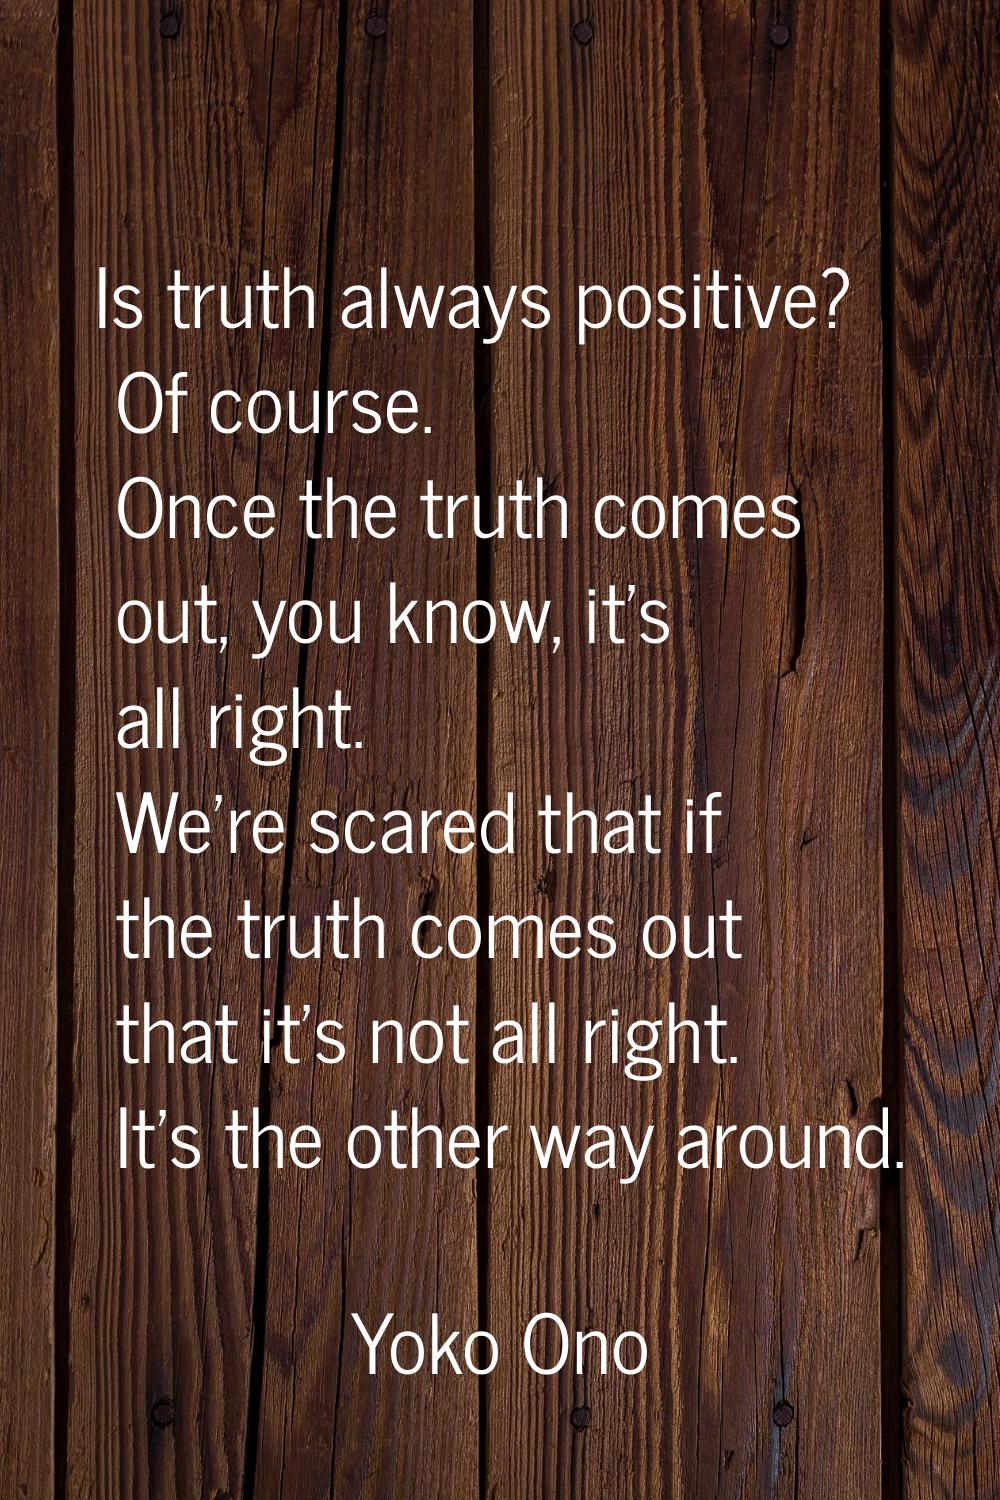 Is truth always positive? Of course. Once the truth comes out, you know, it's all right. We're scar